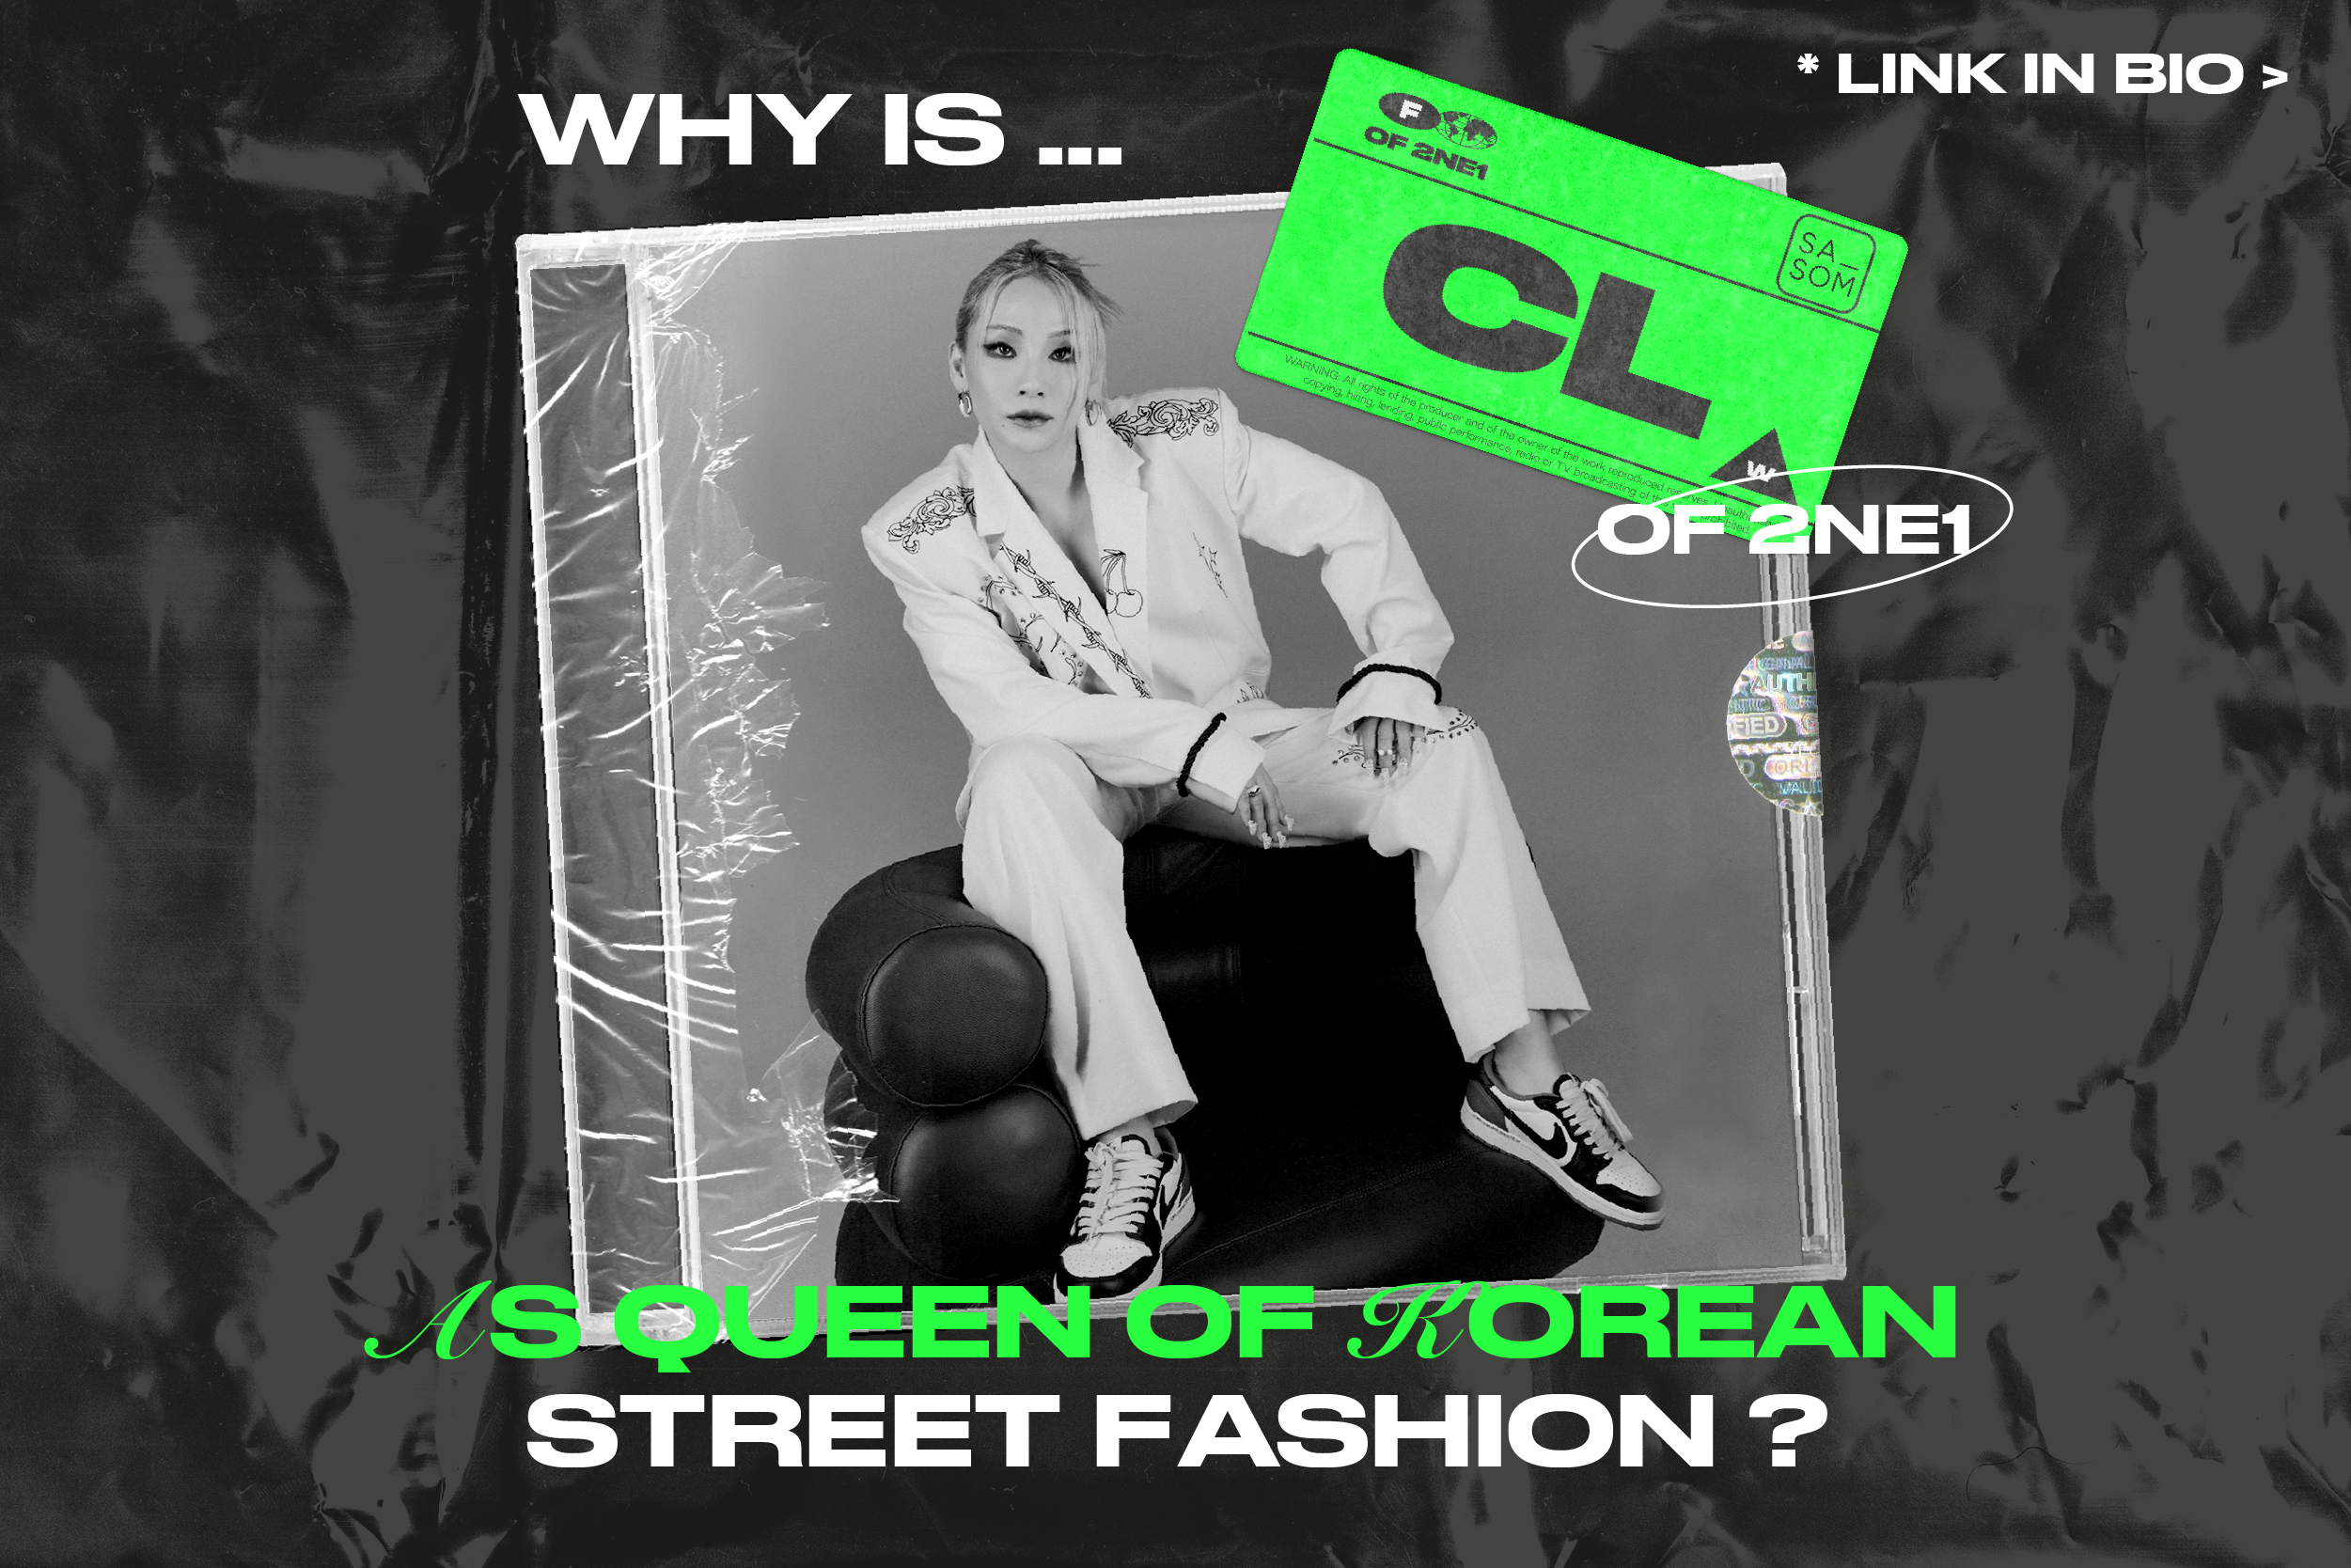 Why is “CL” of 2NE1 as Queen of Korean Street Fashion ?